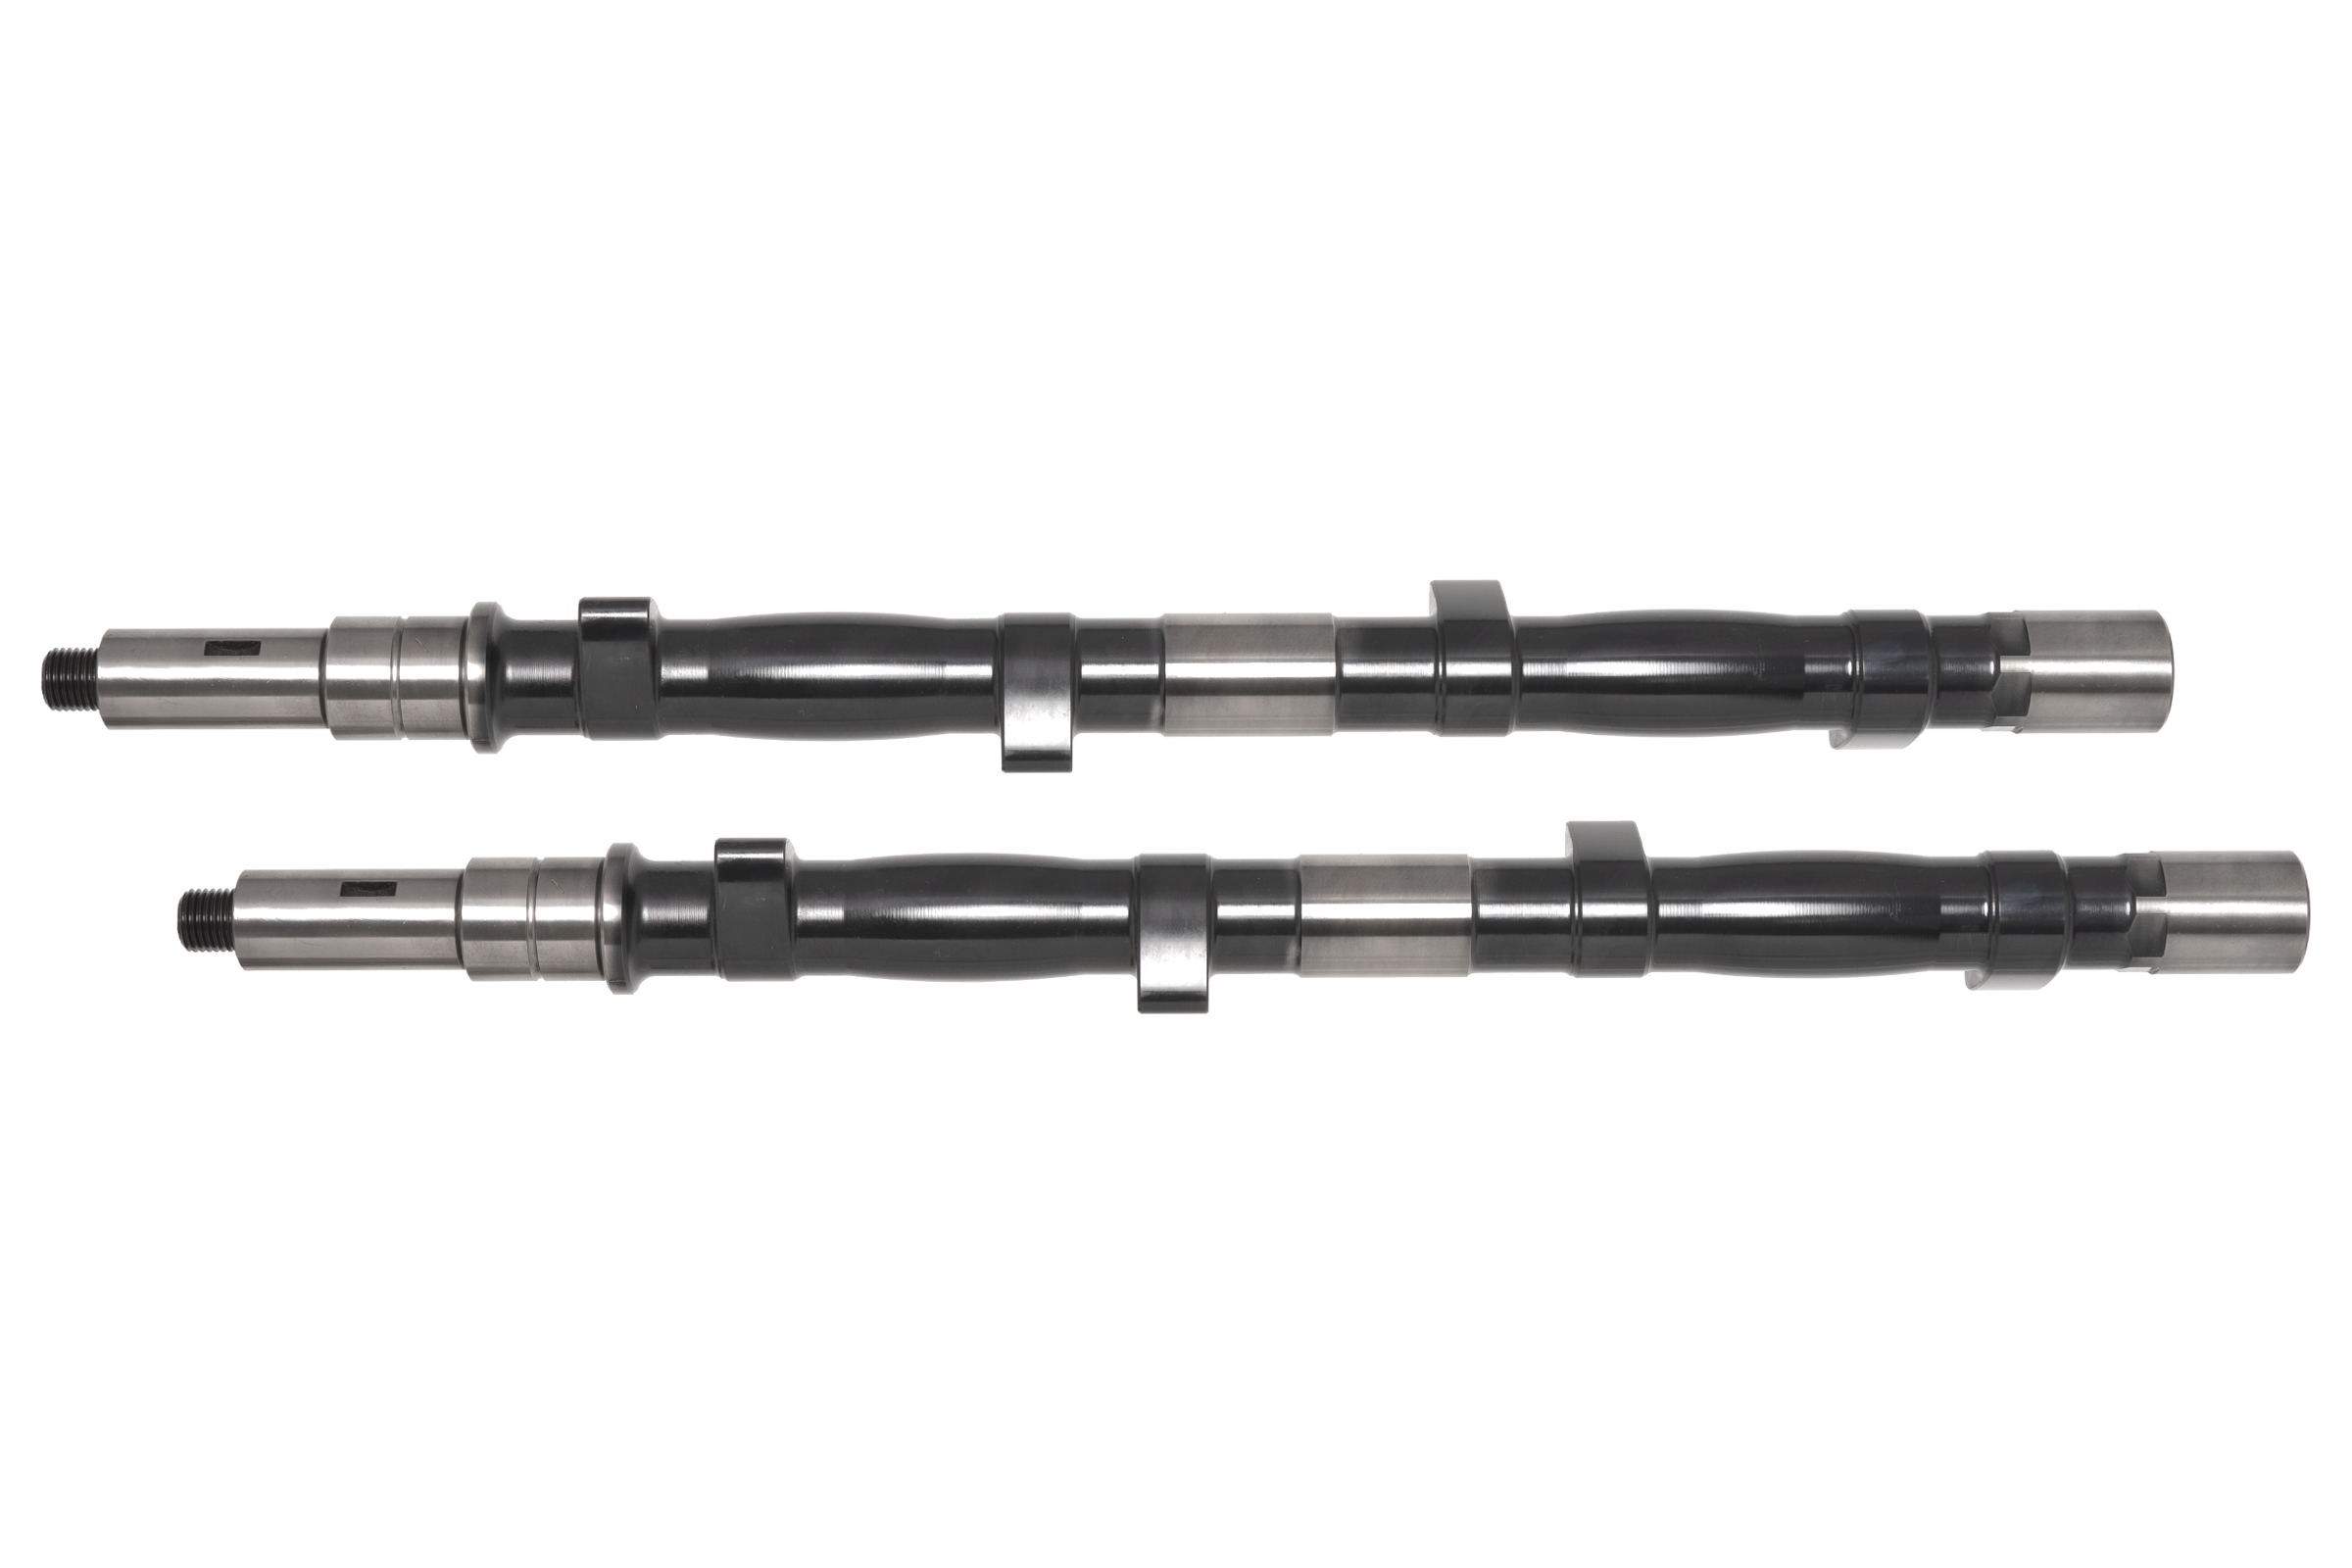 Rifle Drilled Camshafts